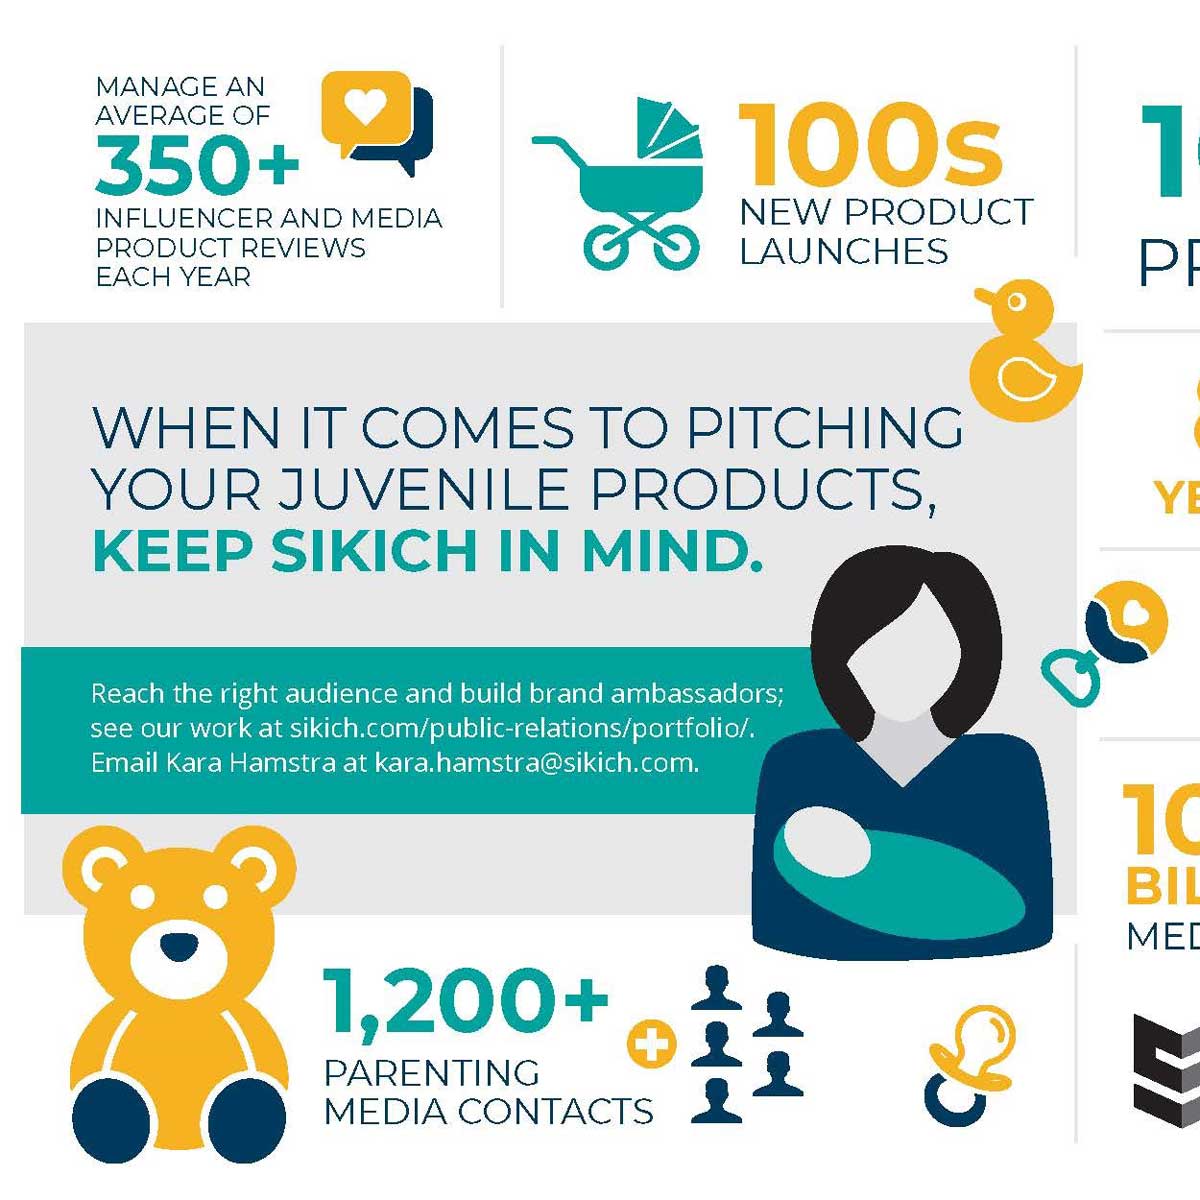 an infographic with facts about juvenile product PR activities at Sikich